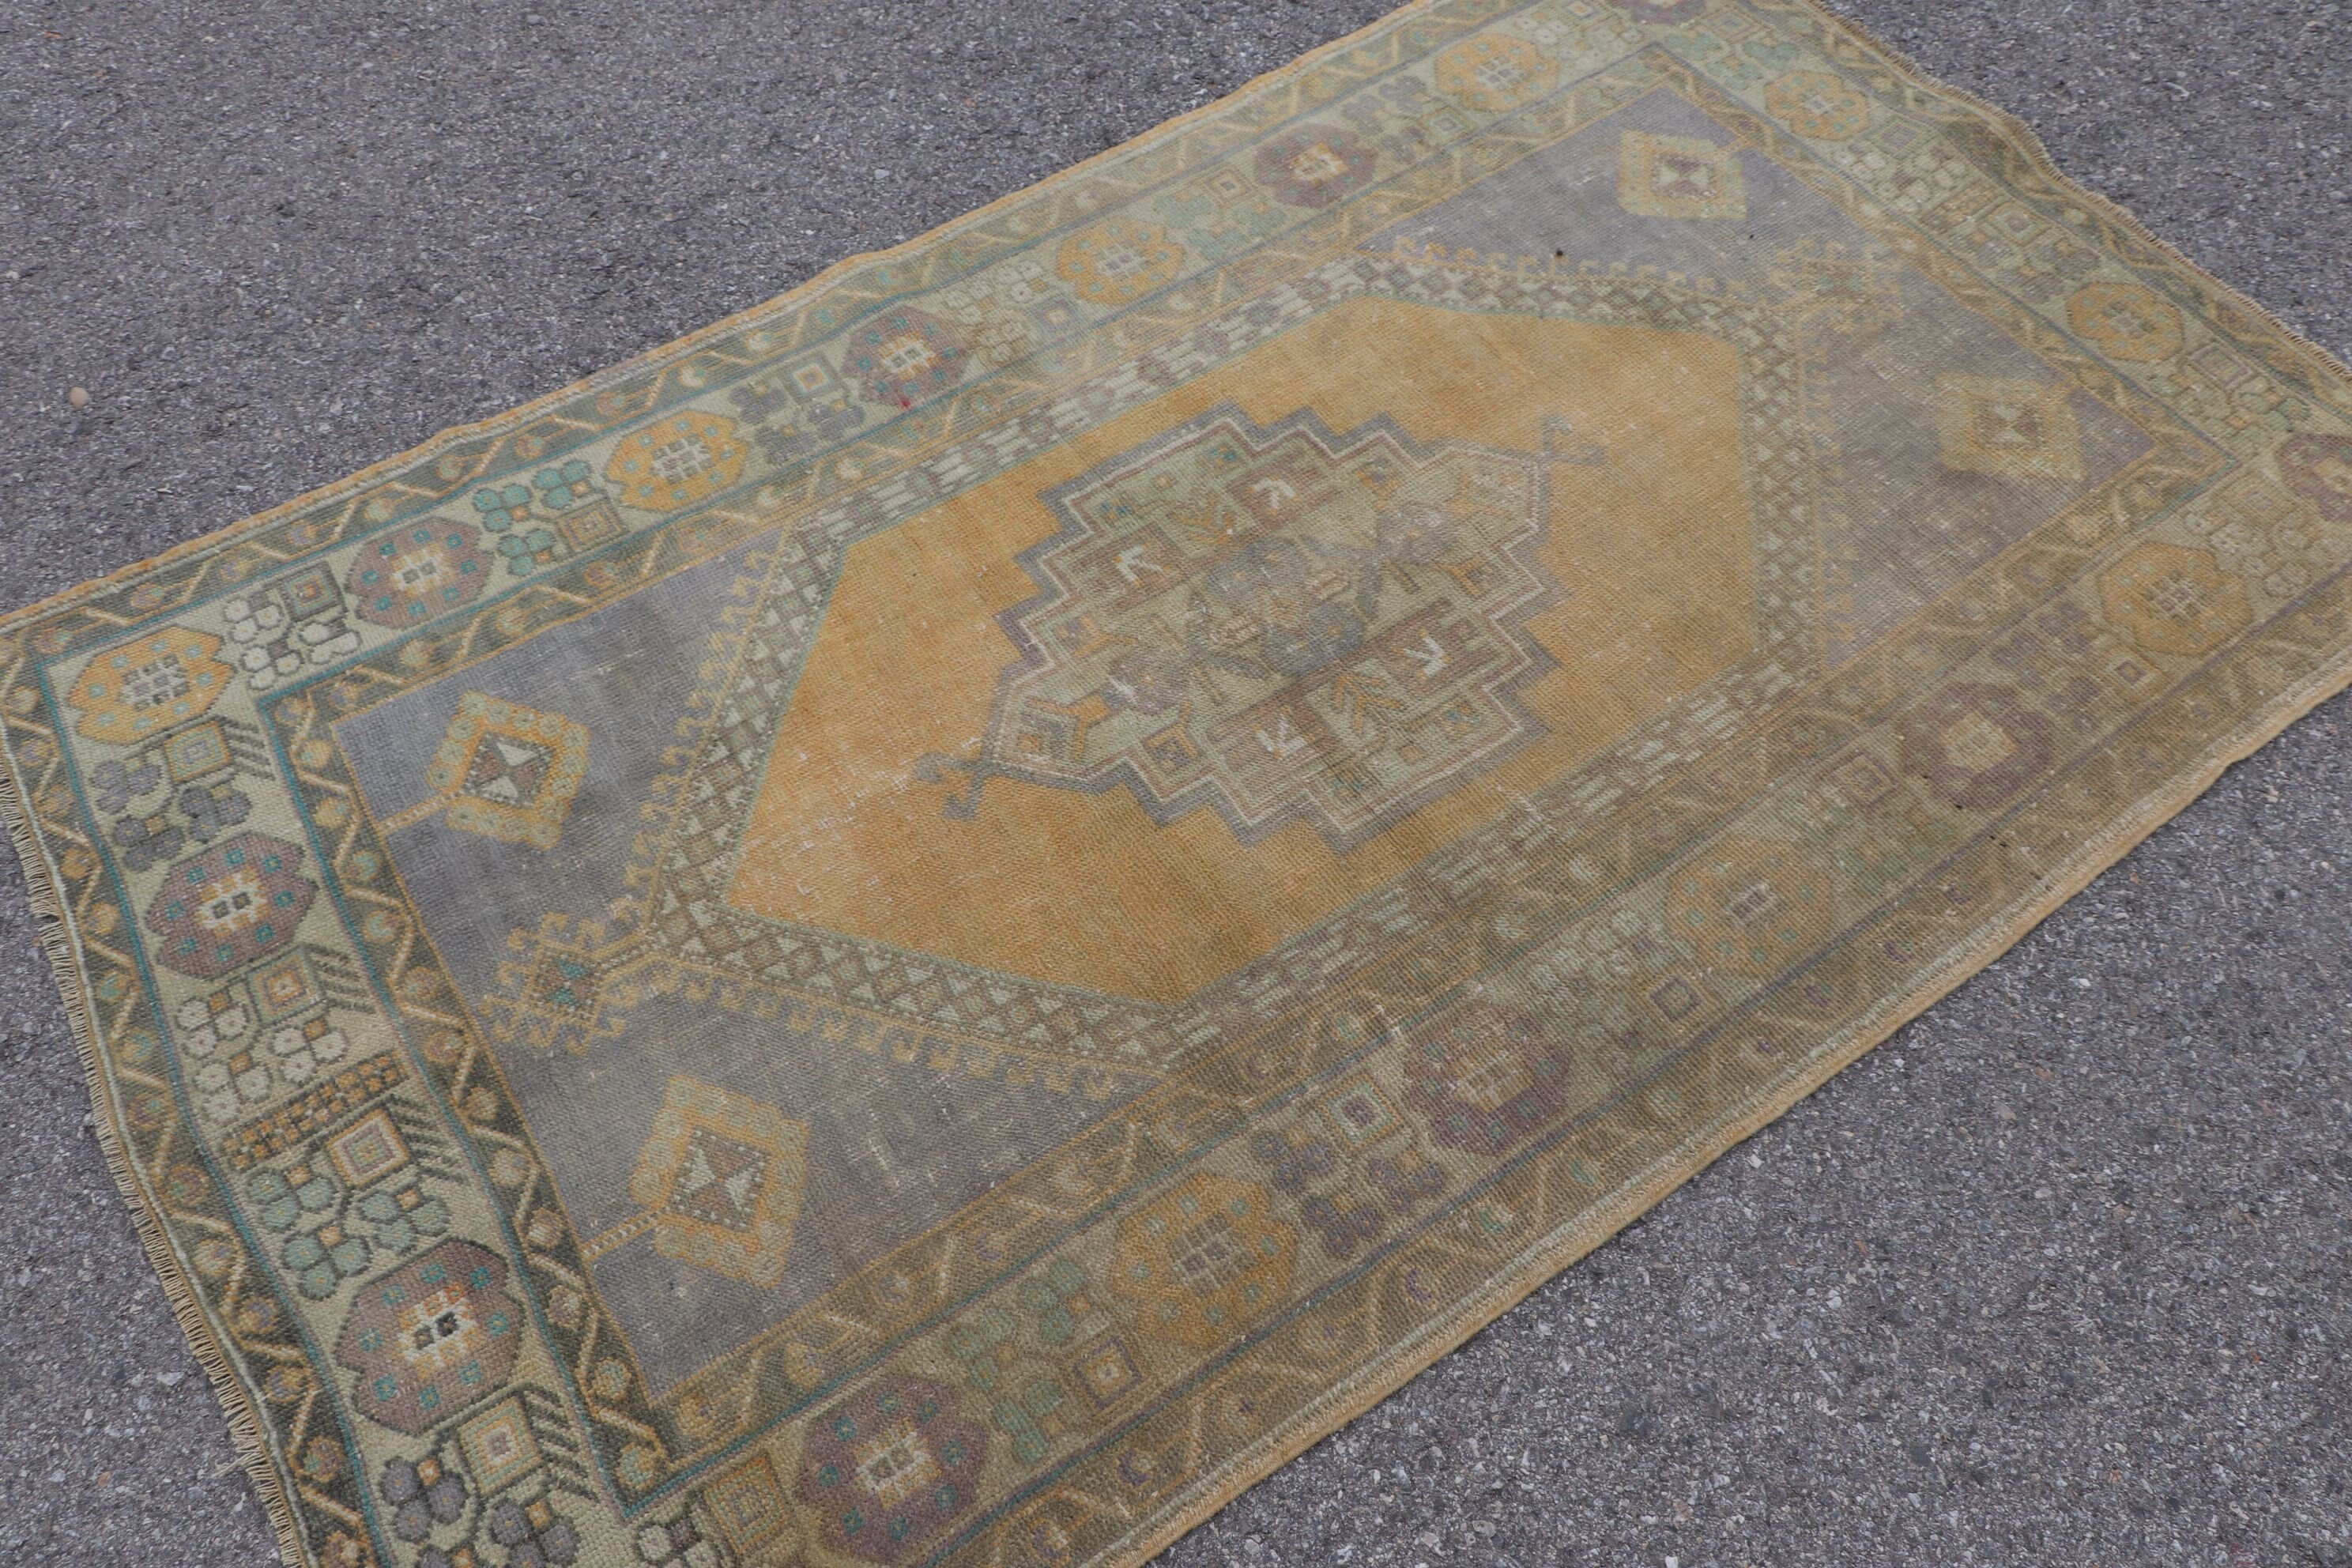 Vintage Rug, Oushak Rug, Turkish Rugs, Yellow  3.6x6 ft Accent Rug, Kitchen Rugs, Rugs for Bedroom, Entry Rug, Bohemian Rugs